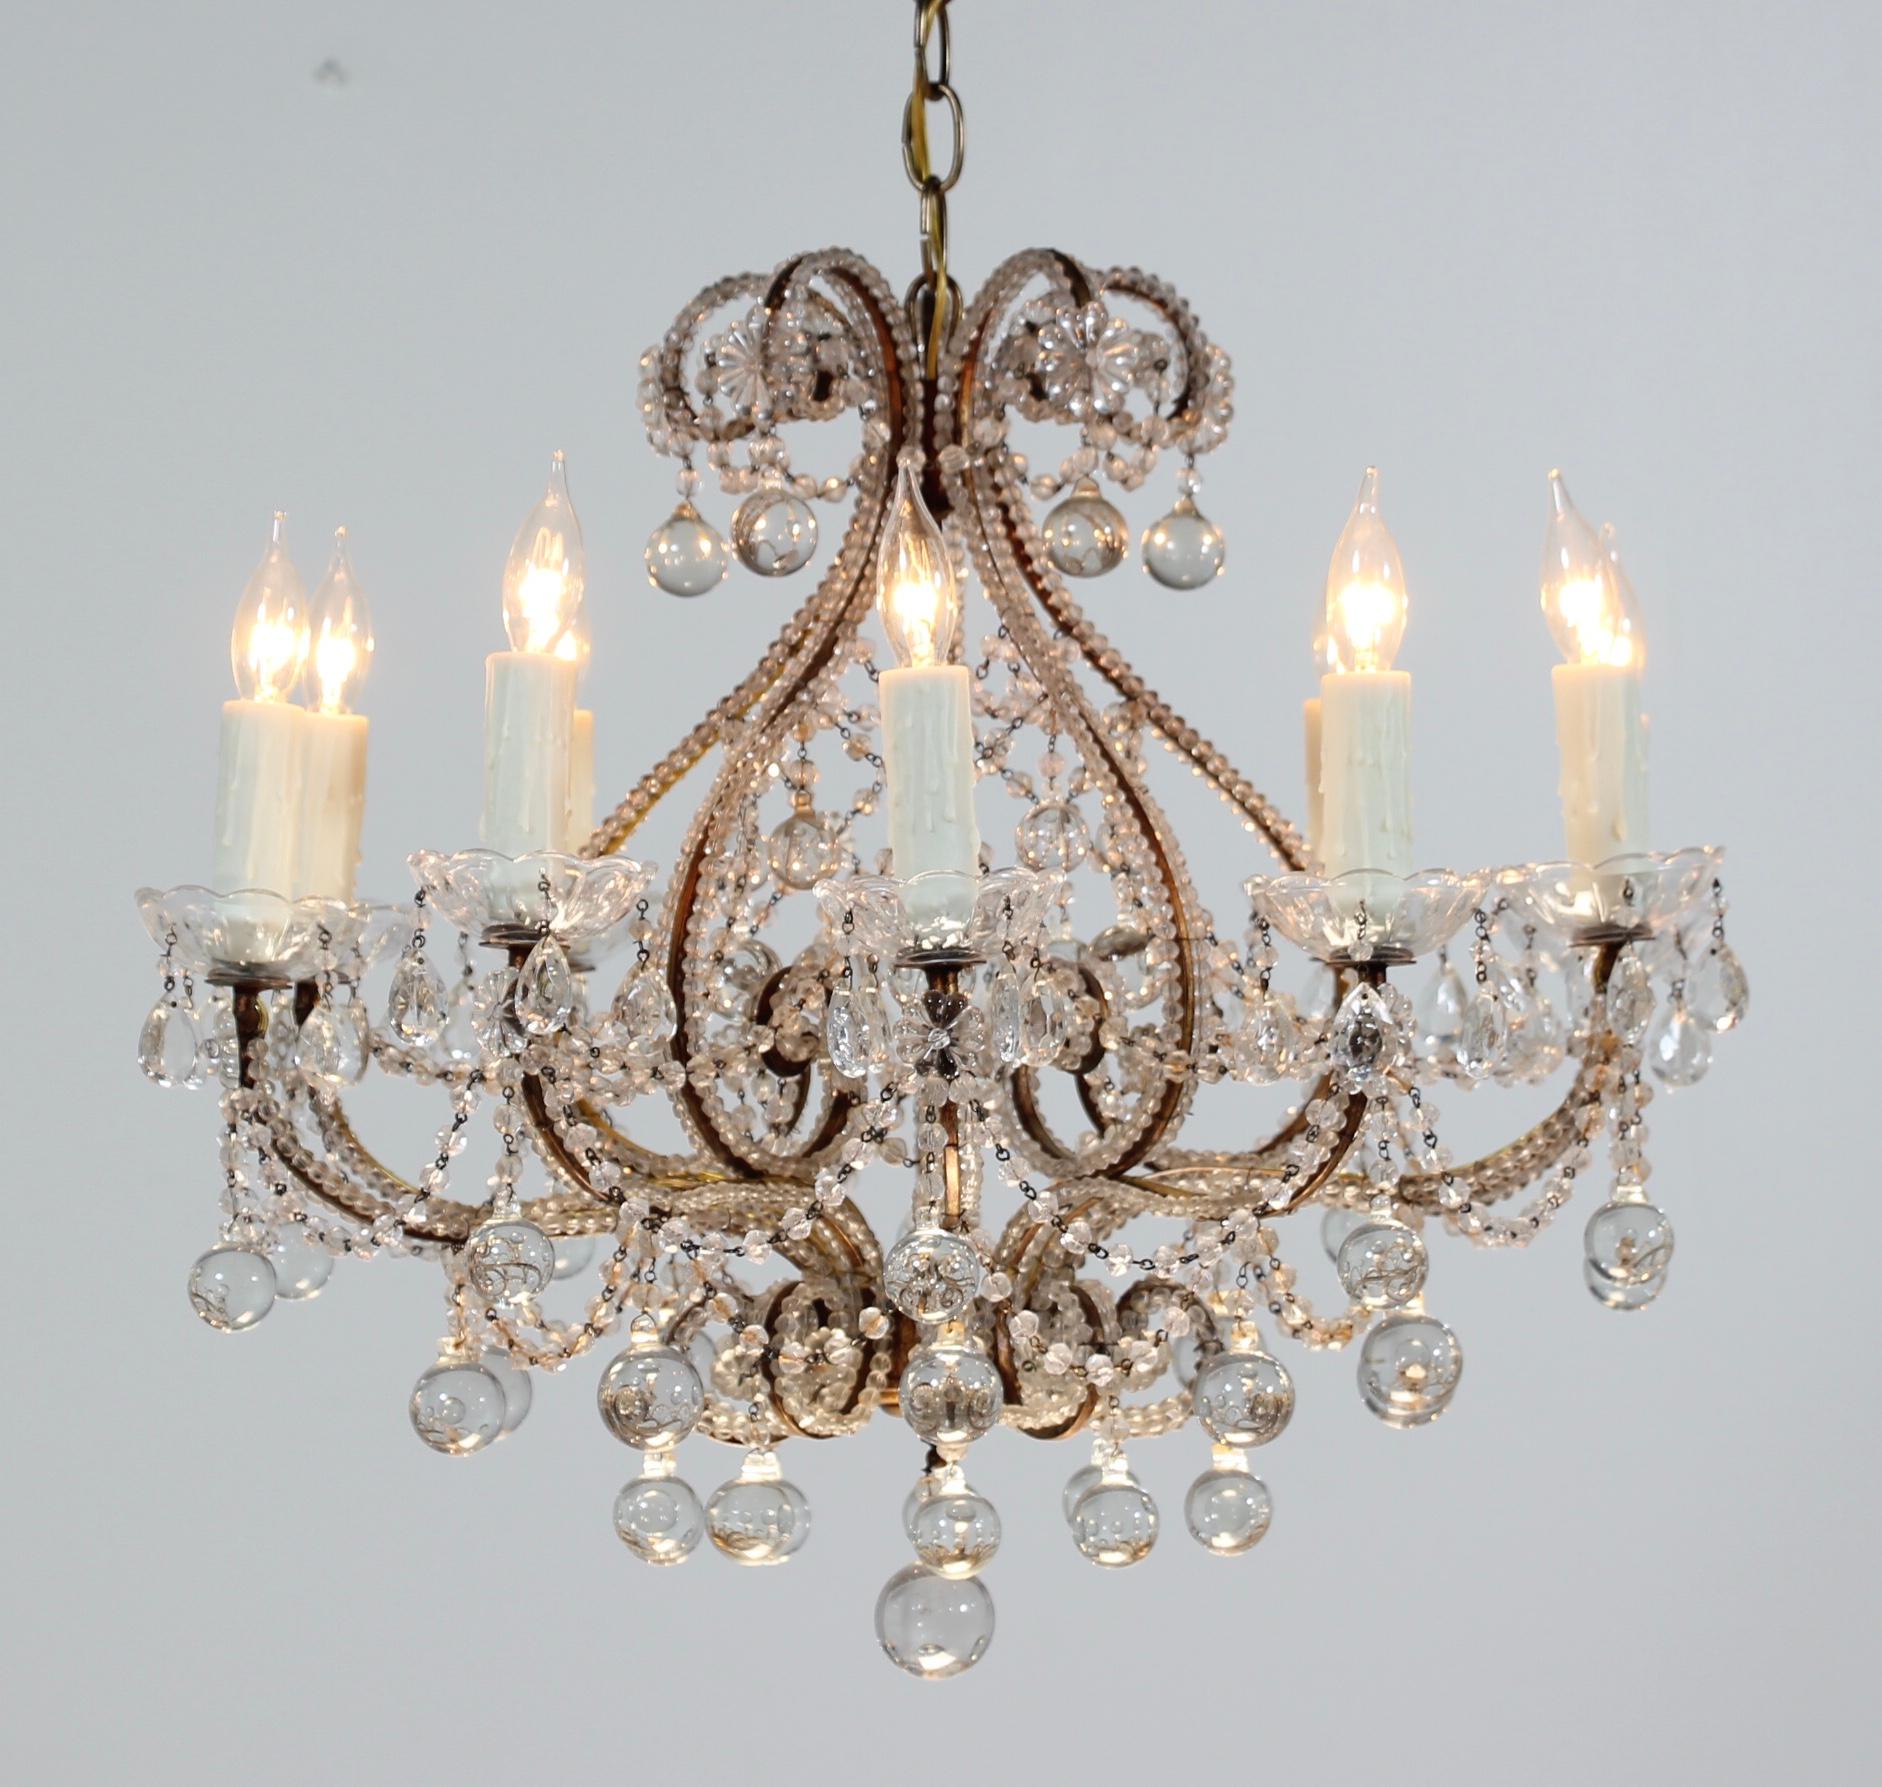      Beautiful, 1940s Italian gilt iron and crystal beaded chandelier. The chandelier consists of a curvaceous gilded iron frame which has been hand beaded with “English cut” beads. Glass ball drops in a variety of sizes complete the chandelier’s